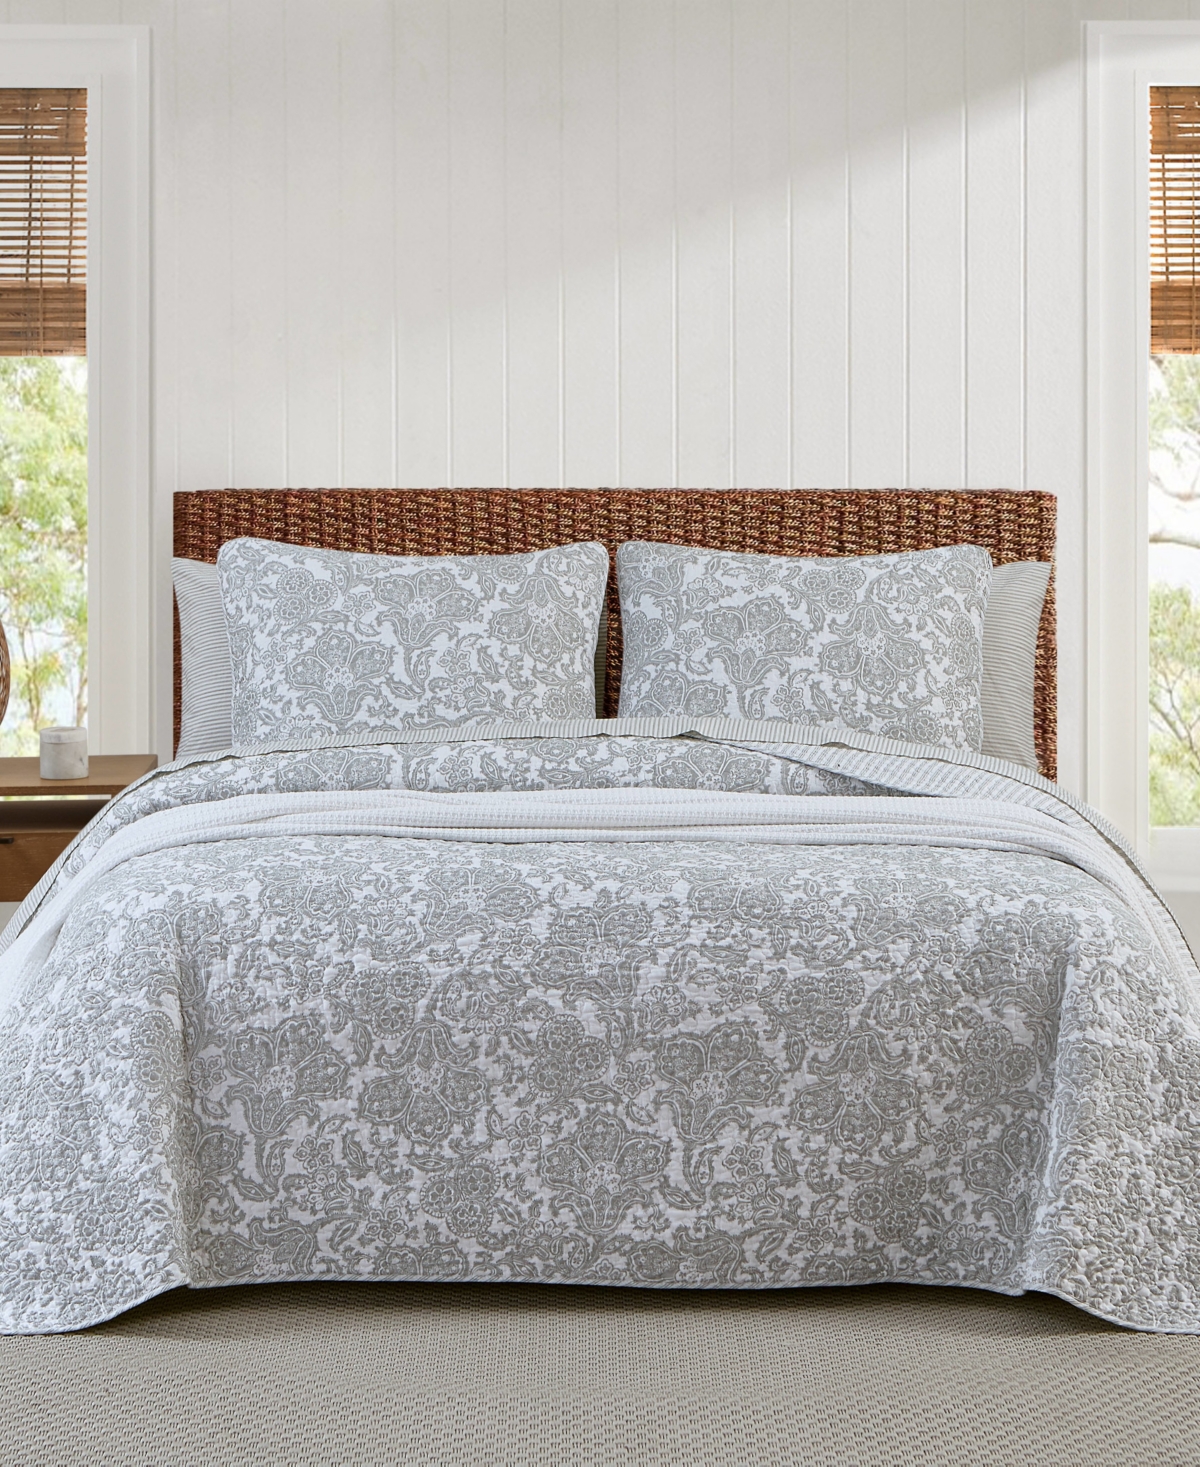 TOMMY BAHAMA HOME ISLAND MEMORY REVERSIBLE 3 PIECE QUILT SET, KING BEDDING